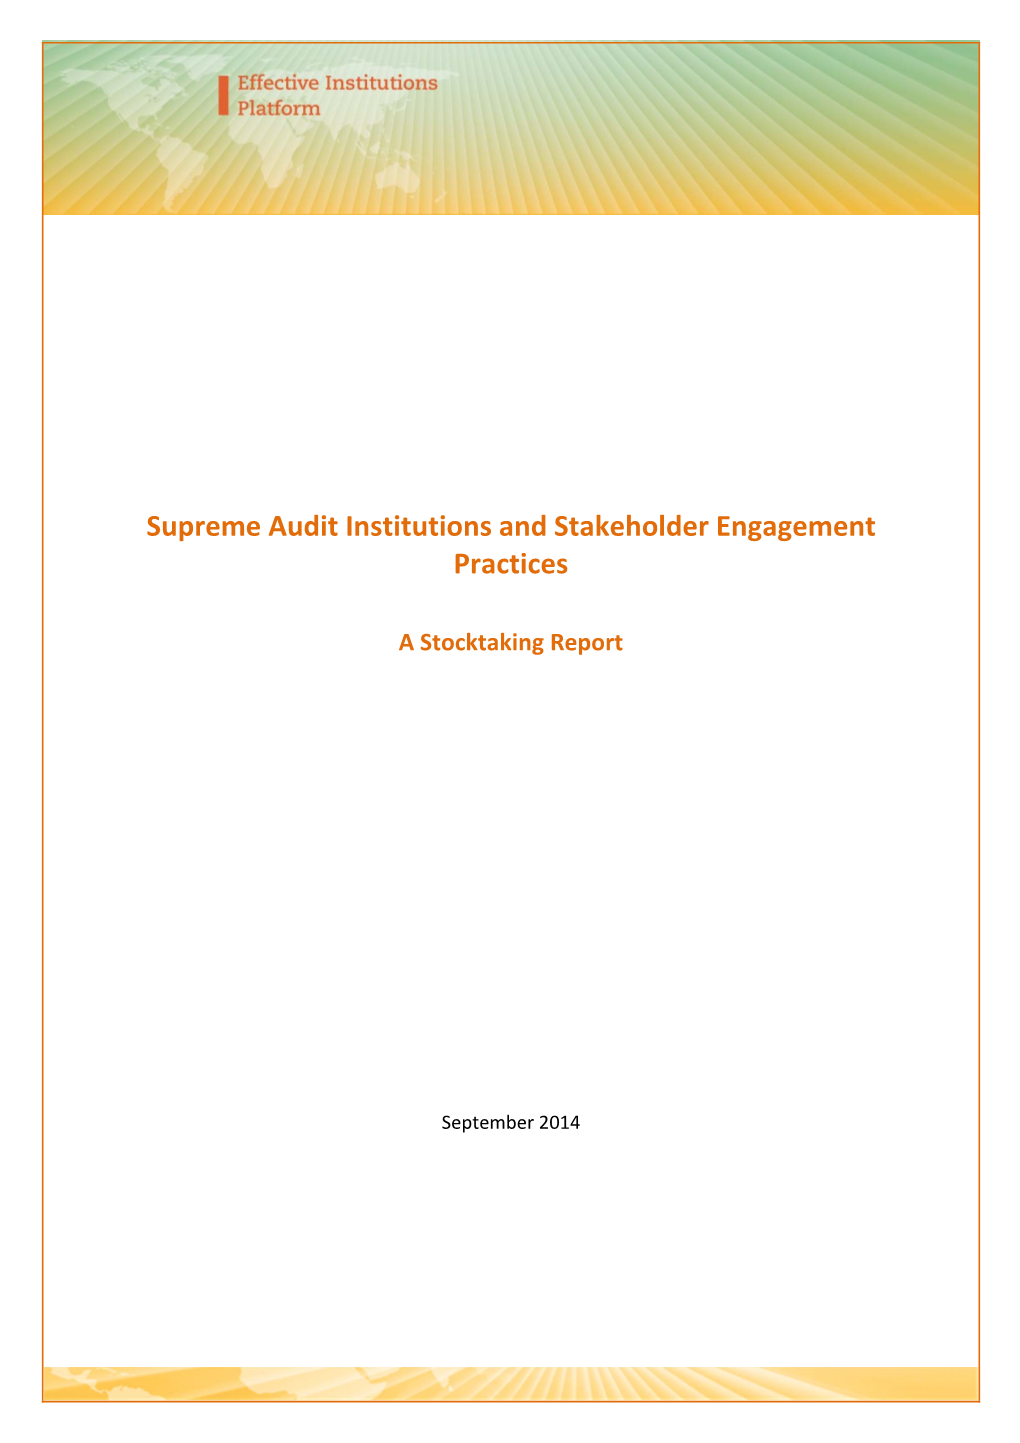 Supreme Audit Institutions and Stakeholder Engagement Practices